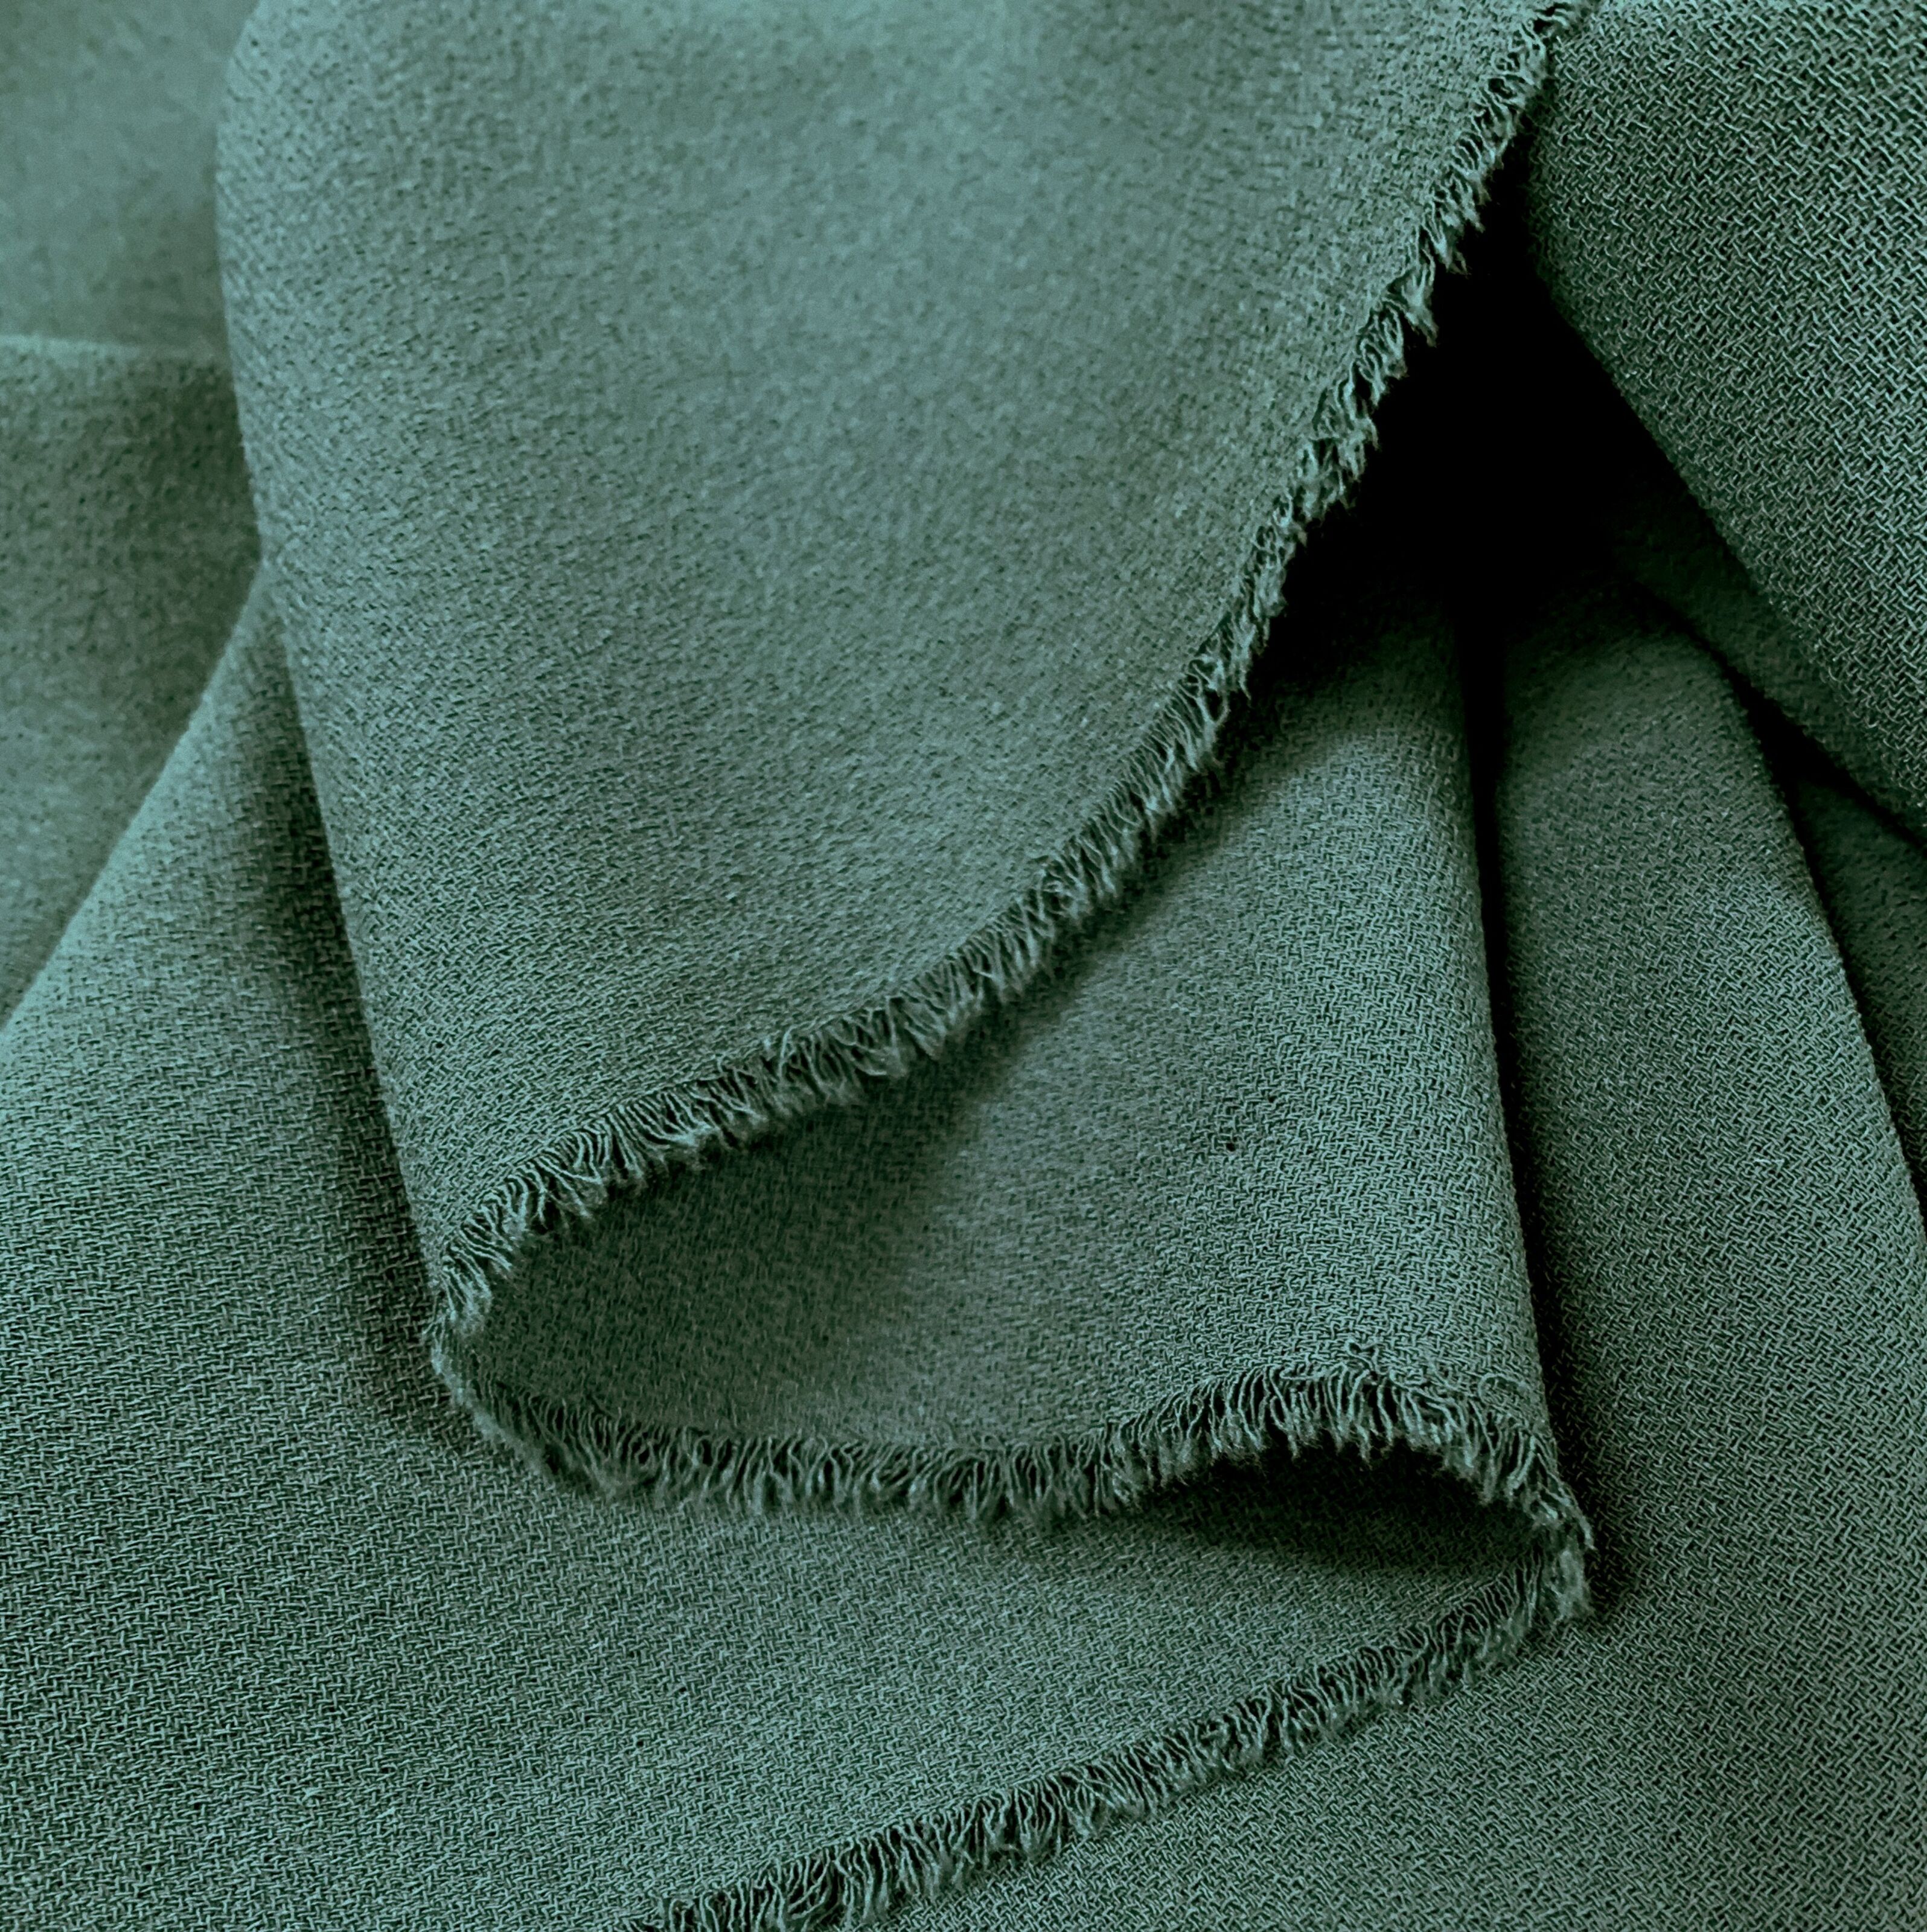  Stretch Crepe Fabric - Versatile Polyester Cloth by The Yard  with 2-Way Stretch - Ideal for Dresses, Gowns, Pants, Drapes, and Backdrops  - 1 Yard (Green) : Arts, Crafts & Sewing